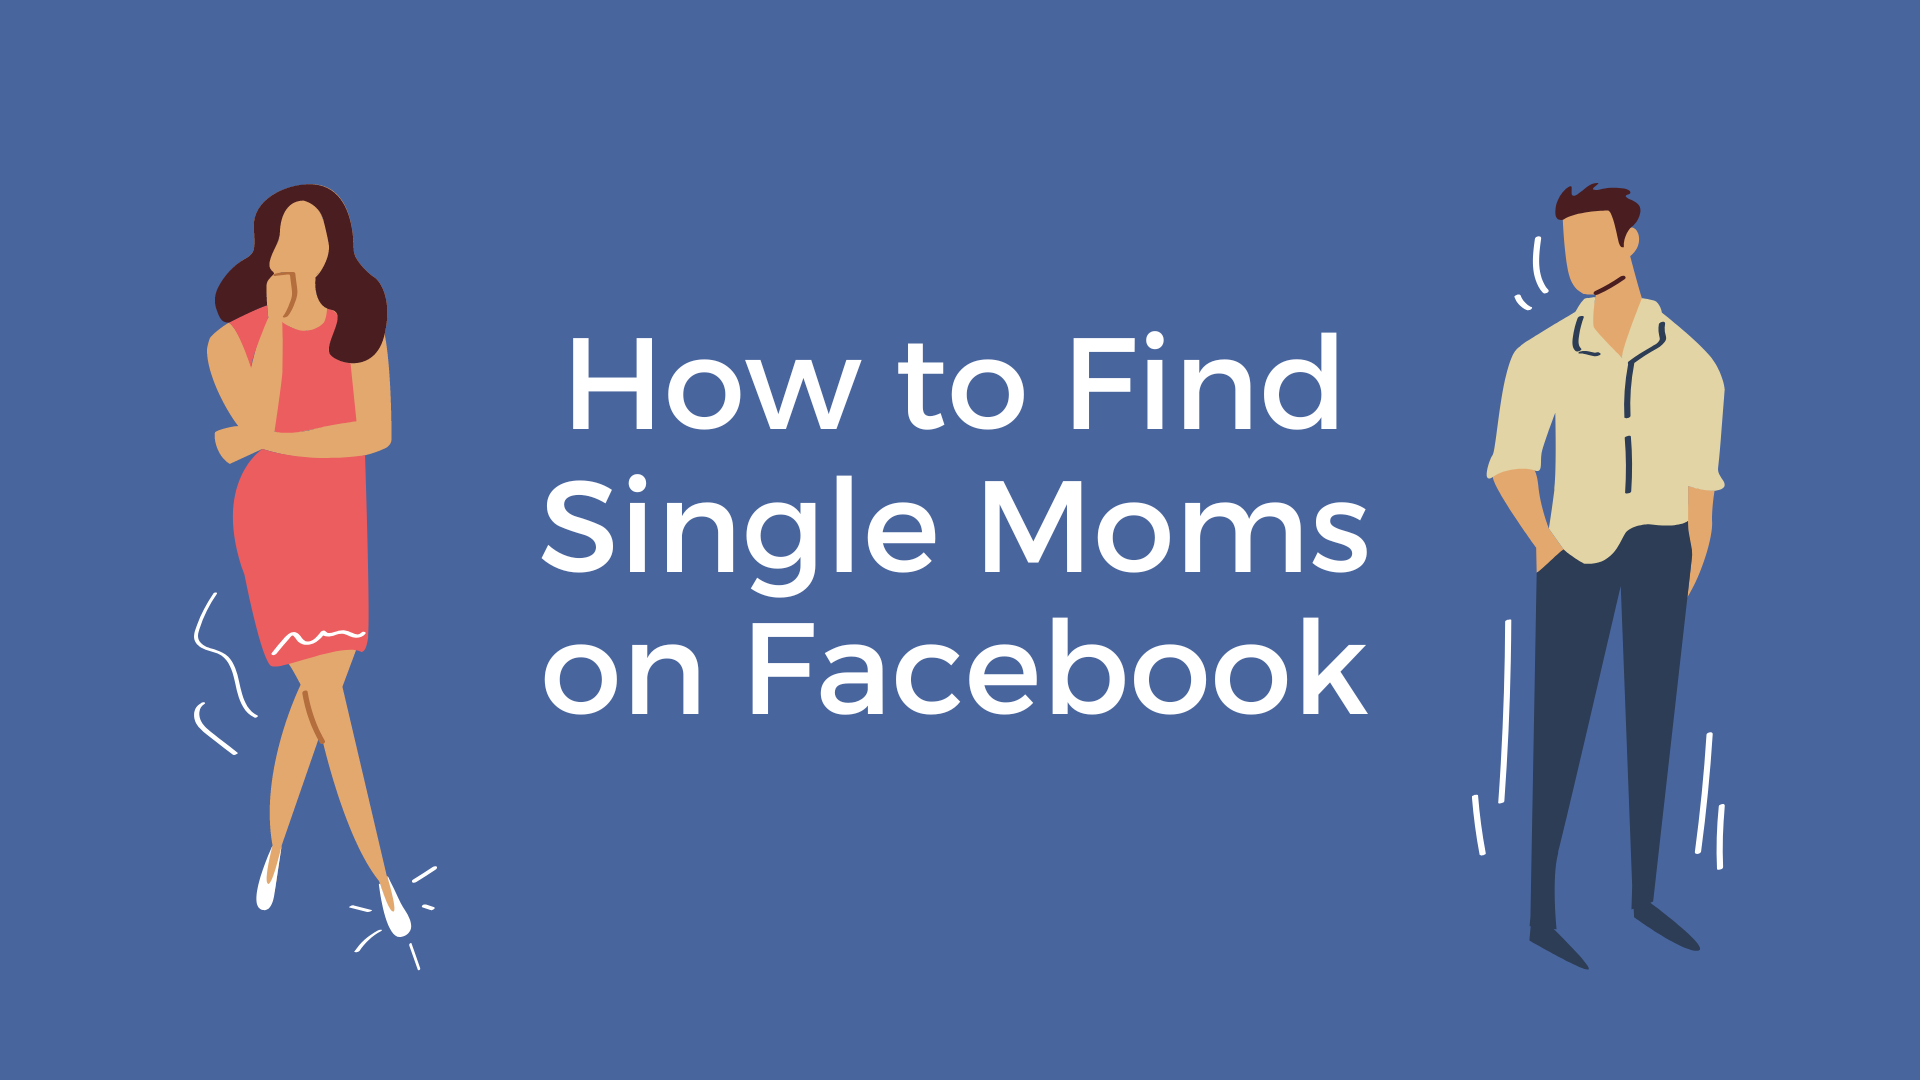 How to Find Single Moms on Facebook